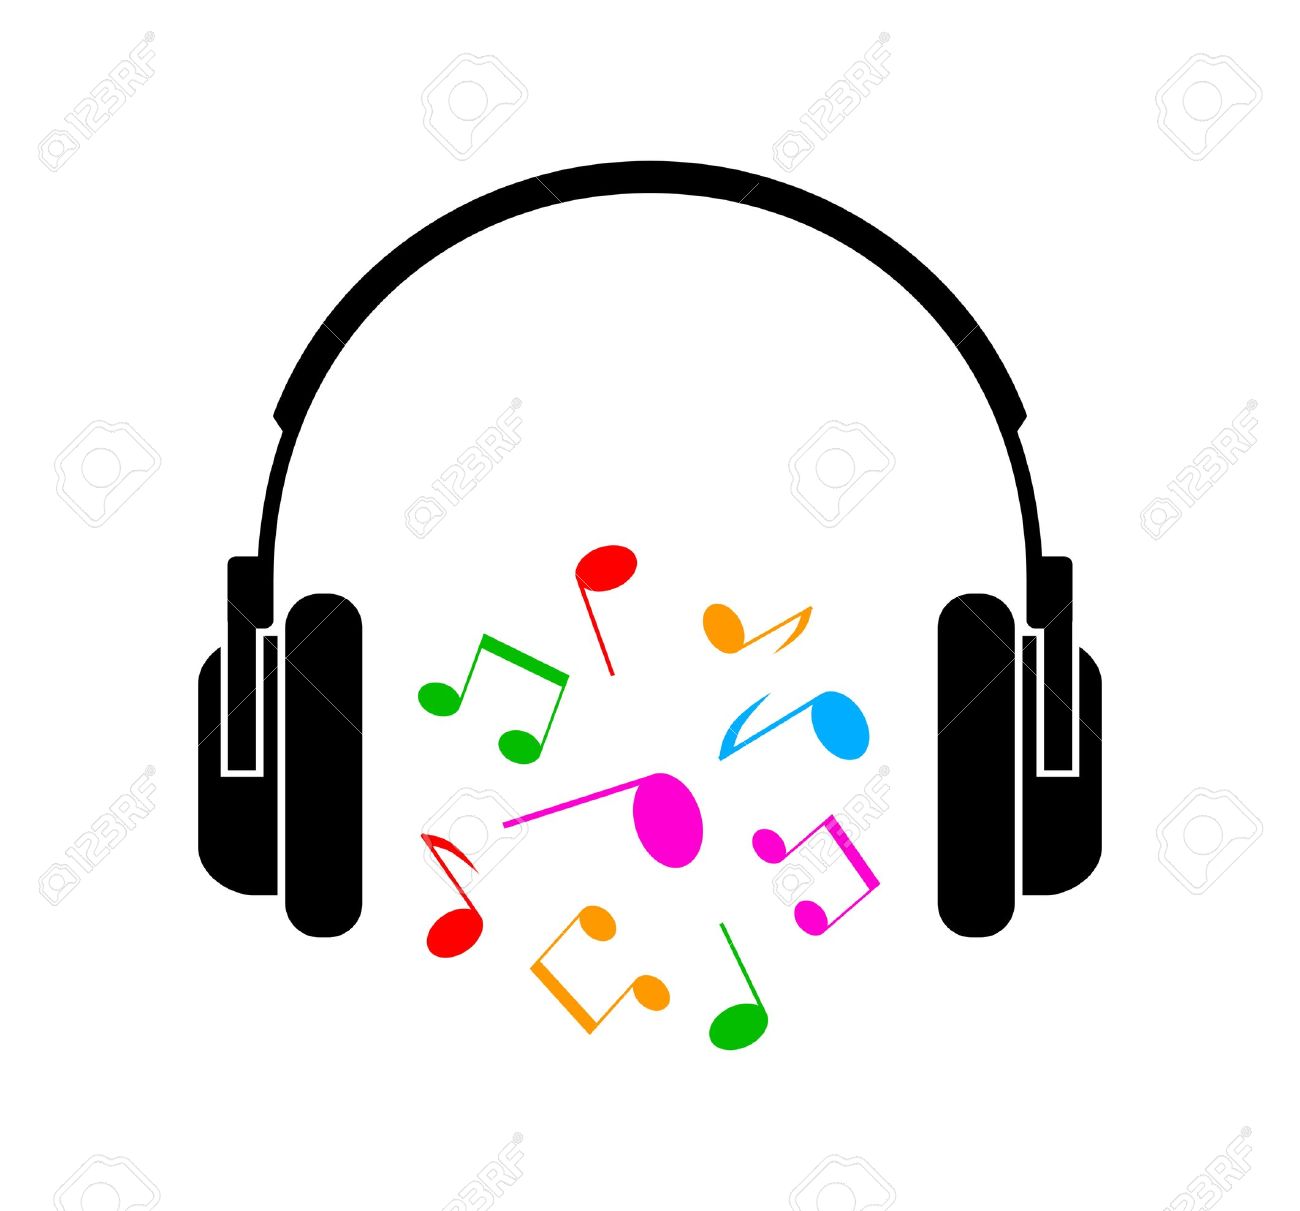 Headphones with music clipart